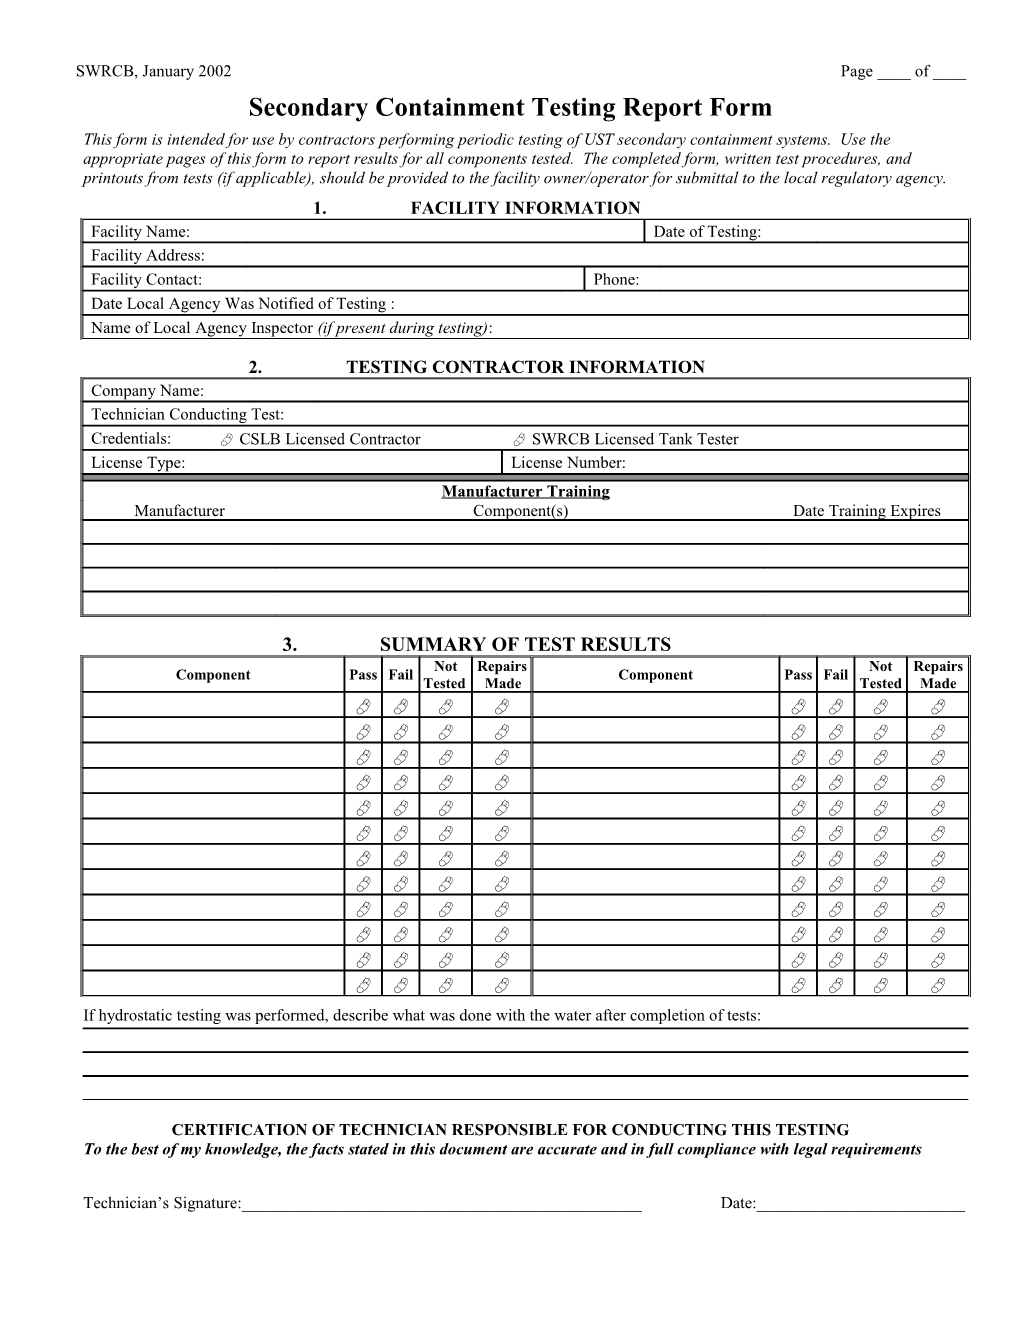 Secondary Containment Testing Report Form